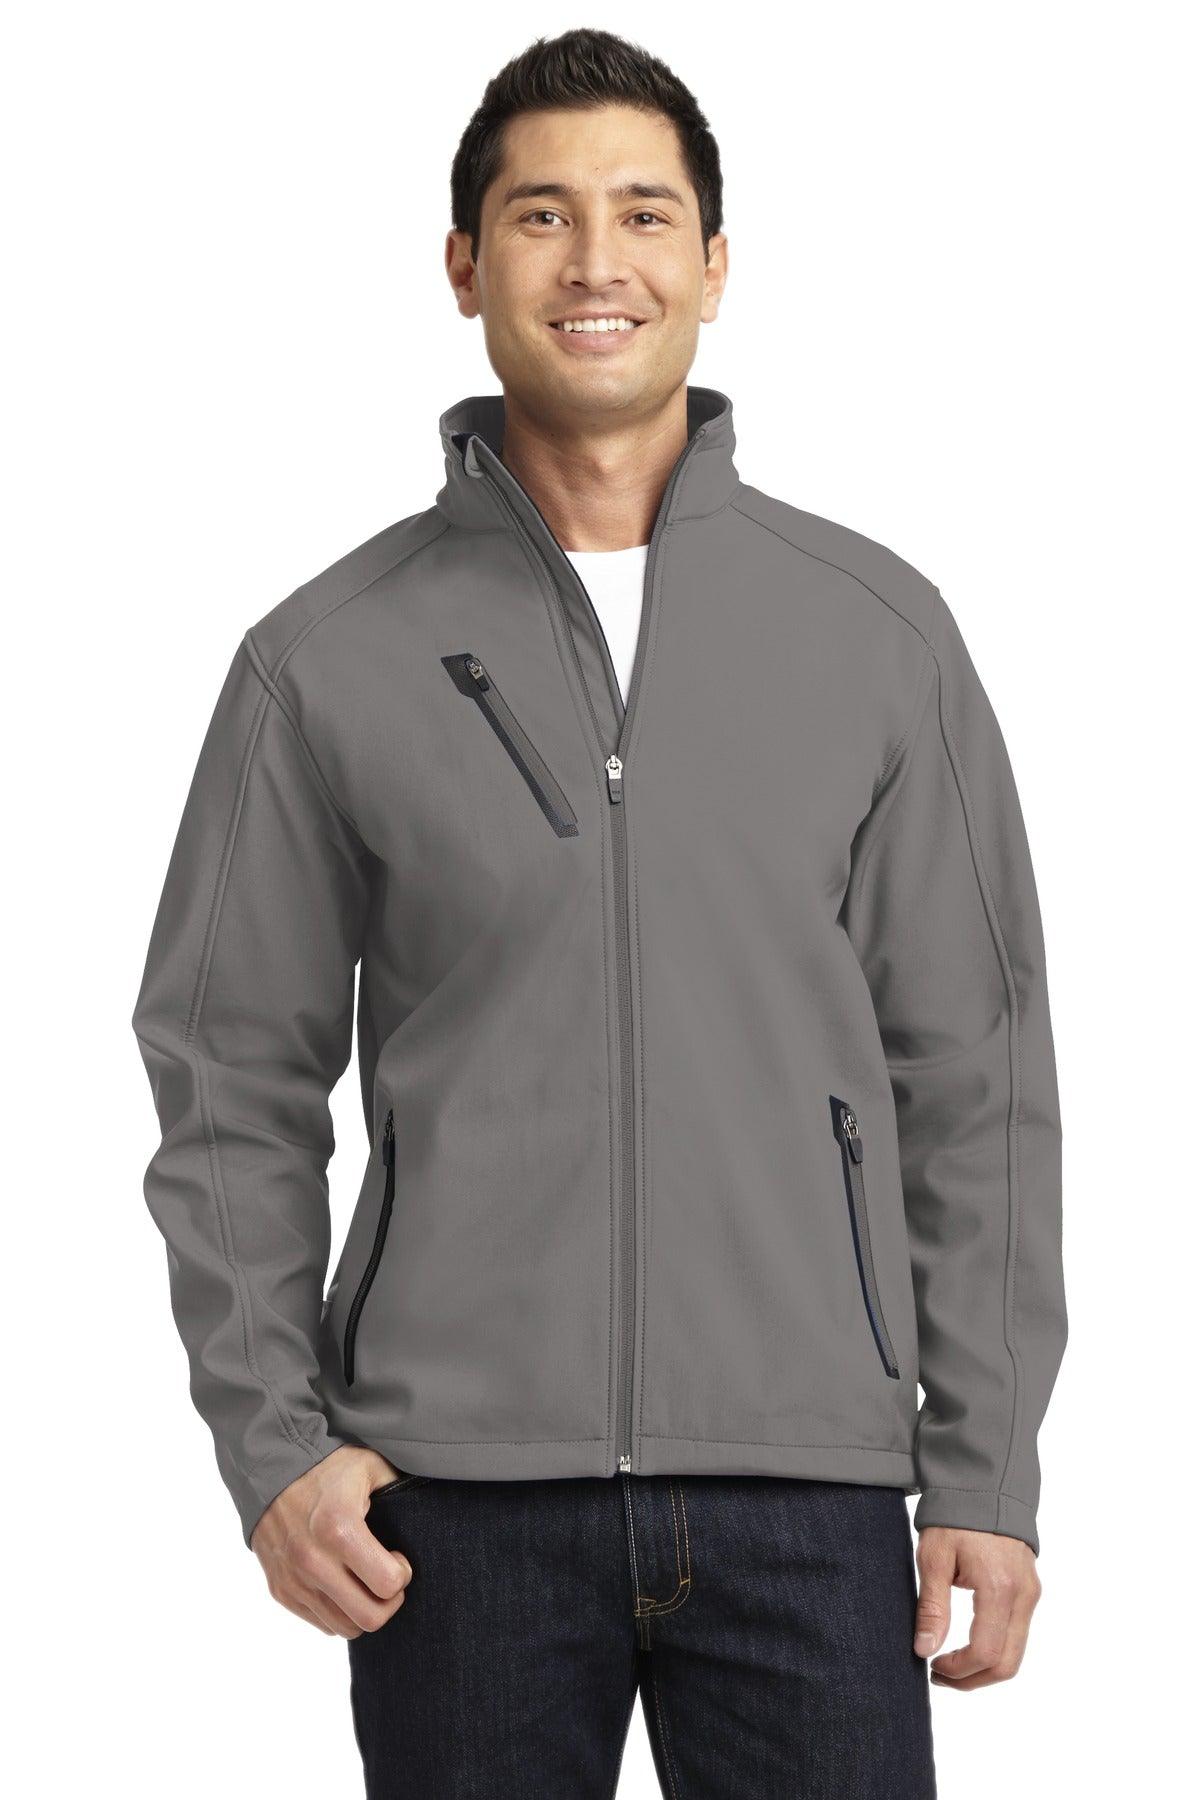 Port Authority Welded Soft Shell Jacket. J324 - Dresses Max